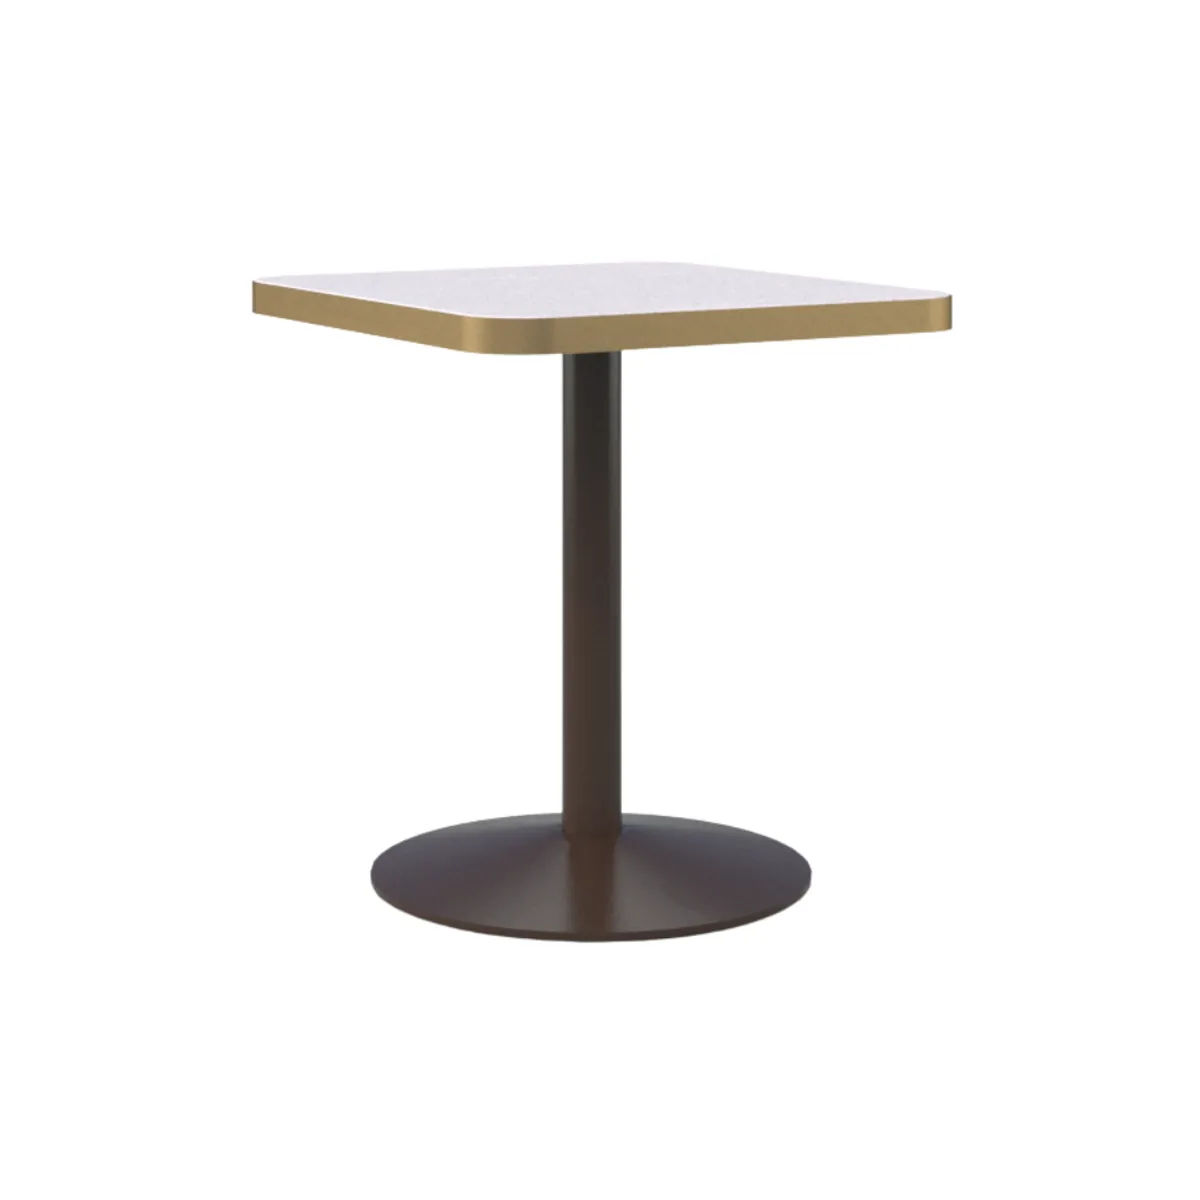 Gouqi square dining table 1